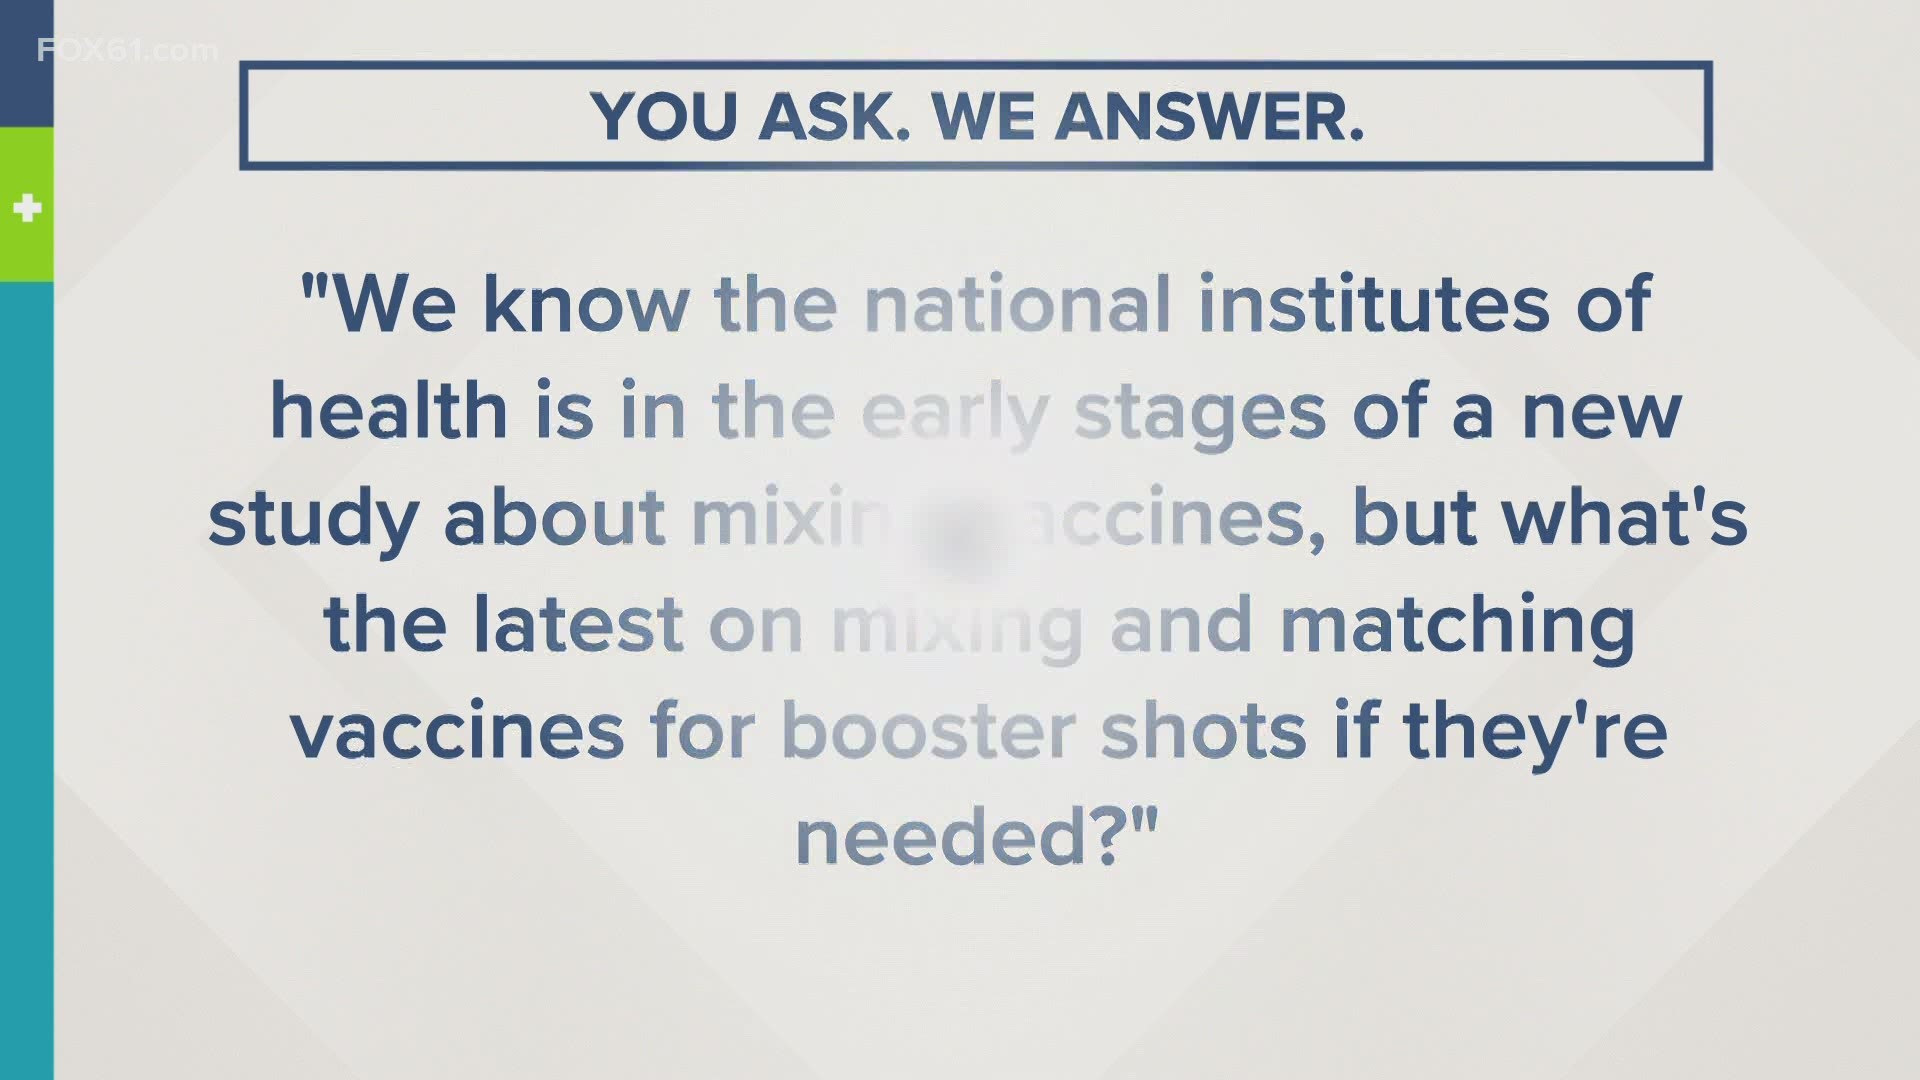 If you have a question about COVID-19 or the vaccine, email SHARE61@fox61.com or text 860-527-6161.